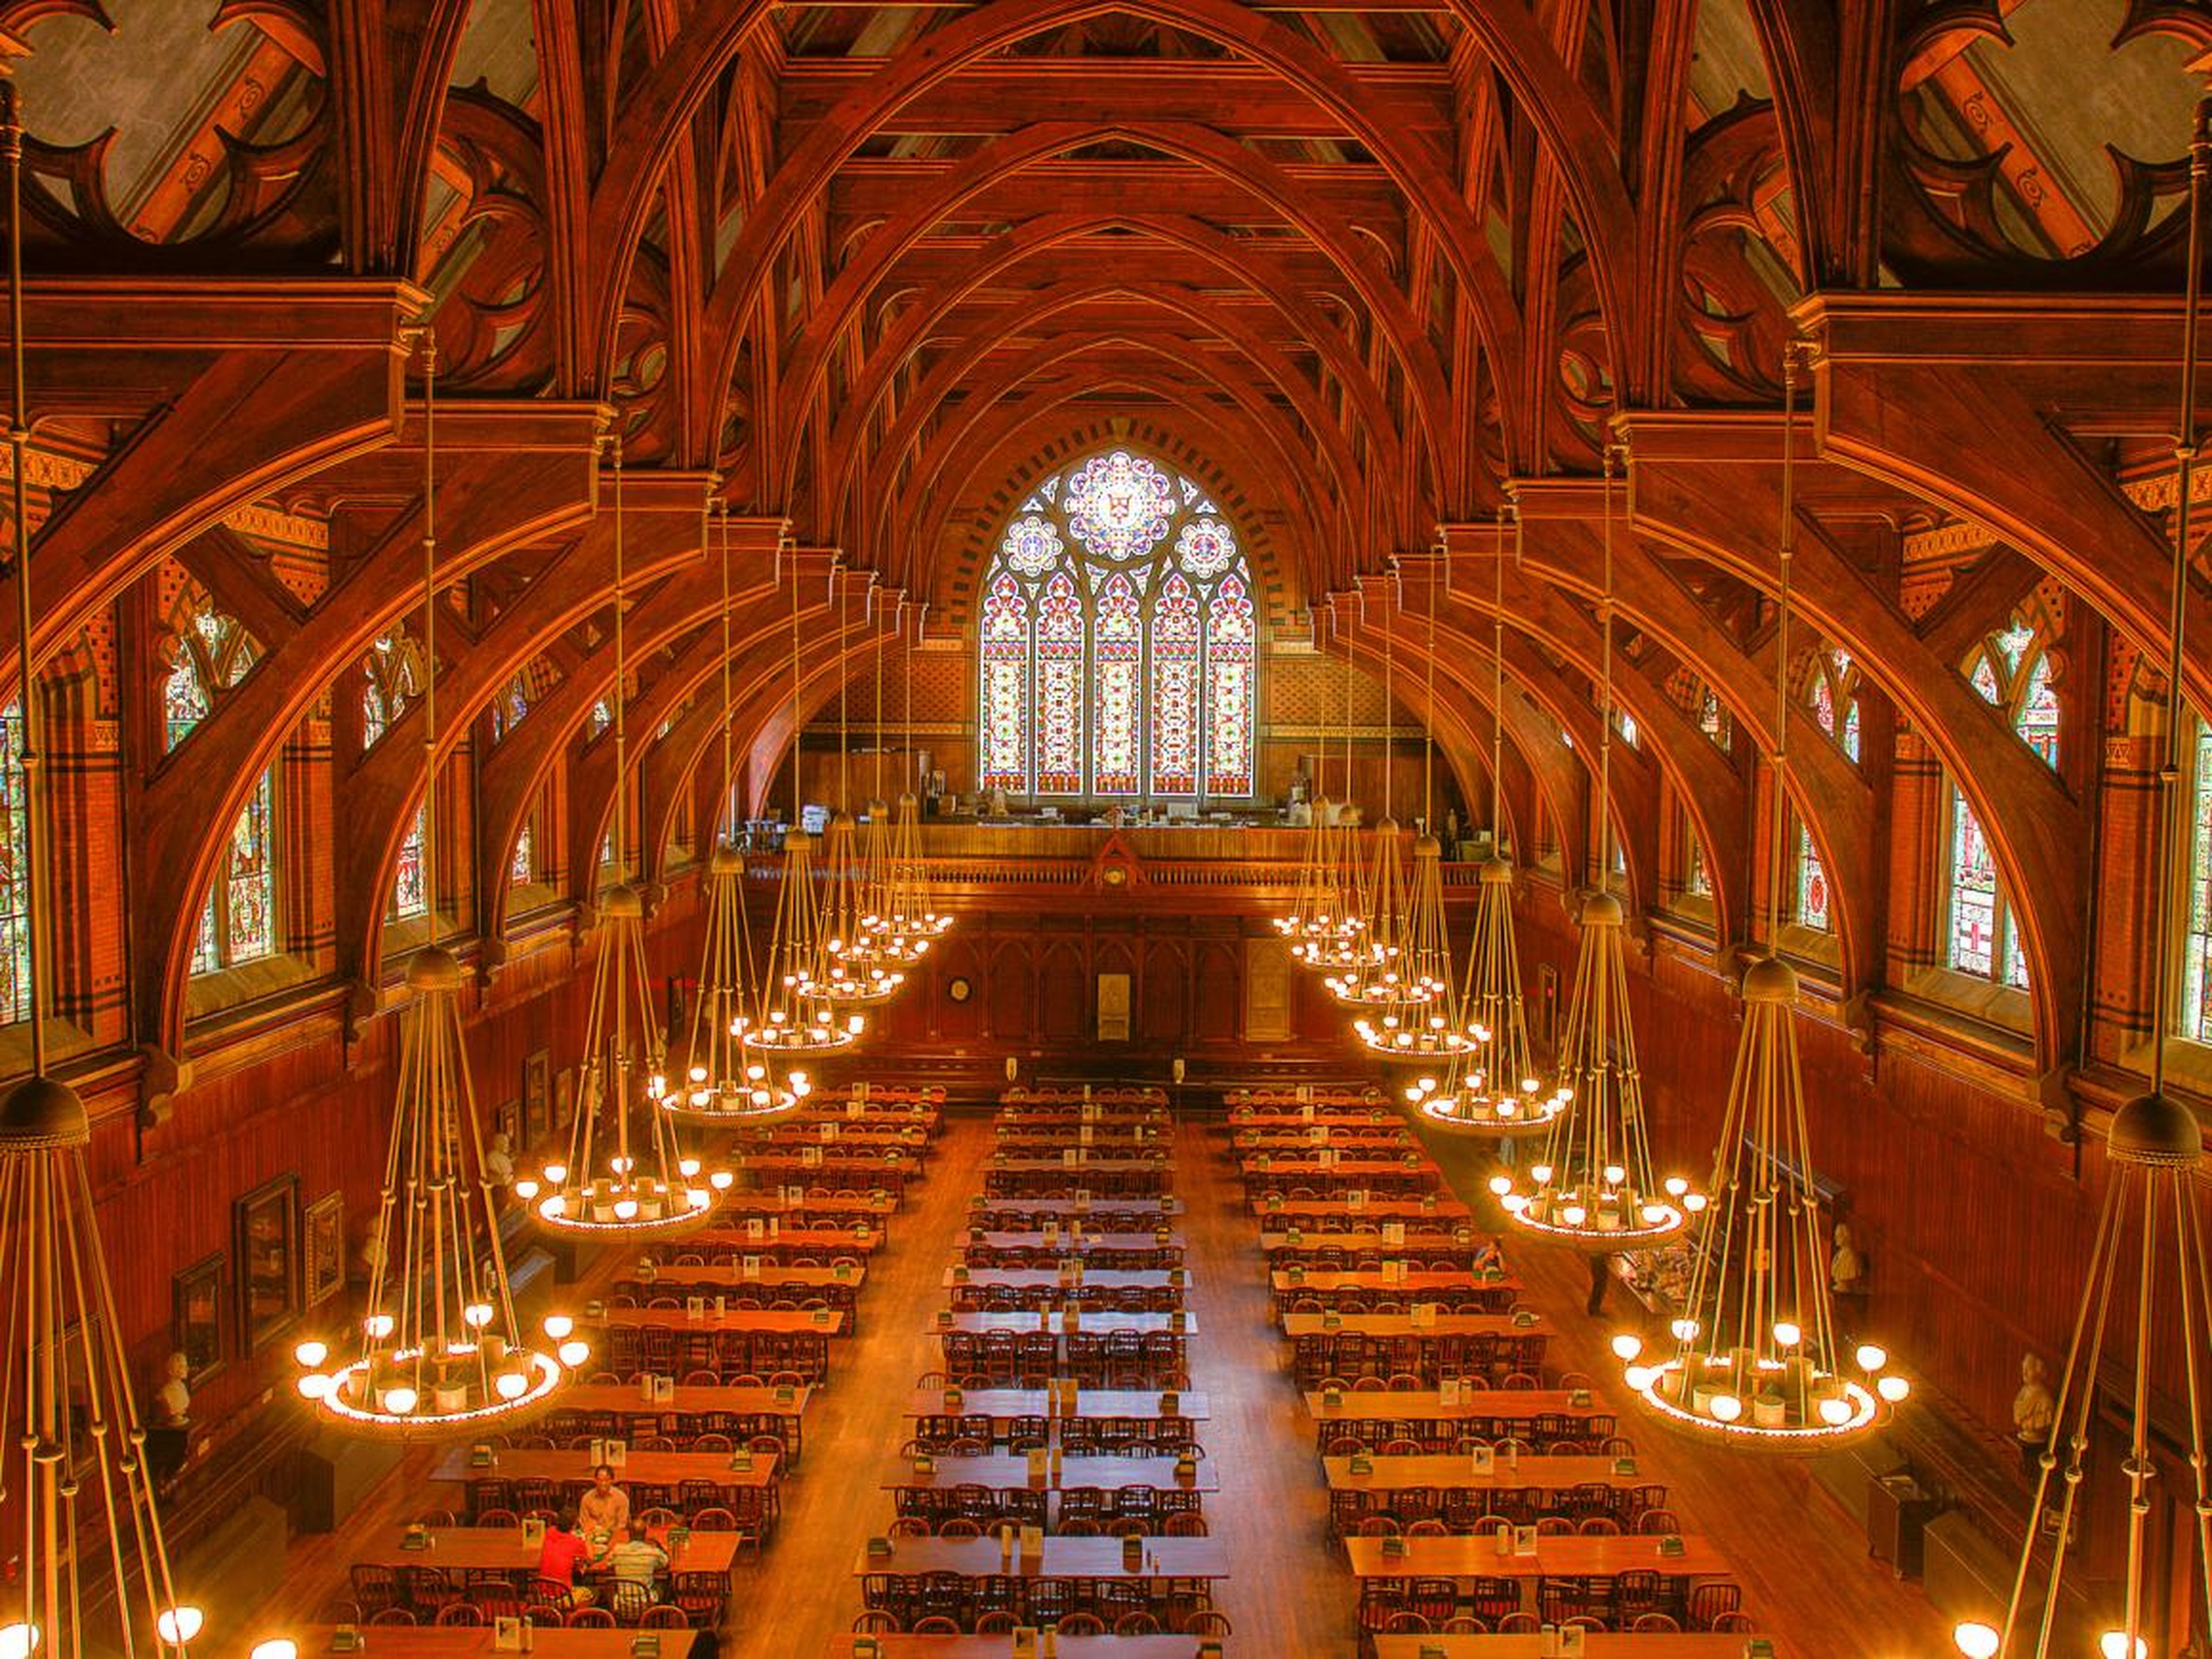 And then there's the majestic Annenberg, the dining hall for first-years that looks like a Harry Potter movie set.